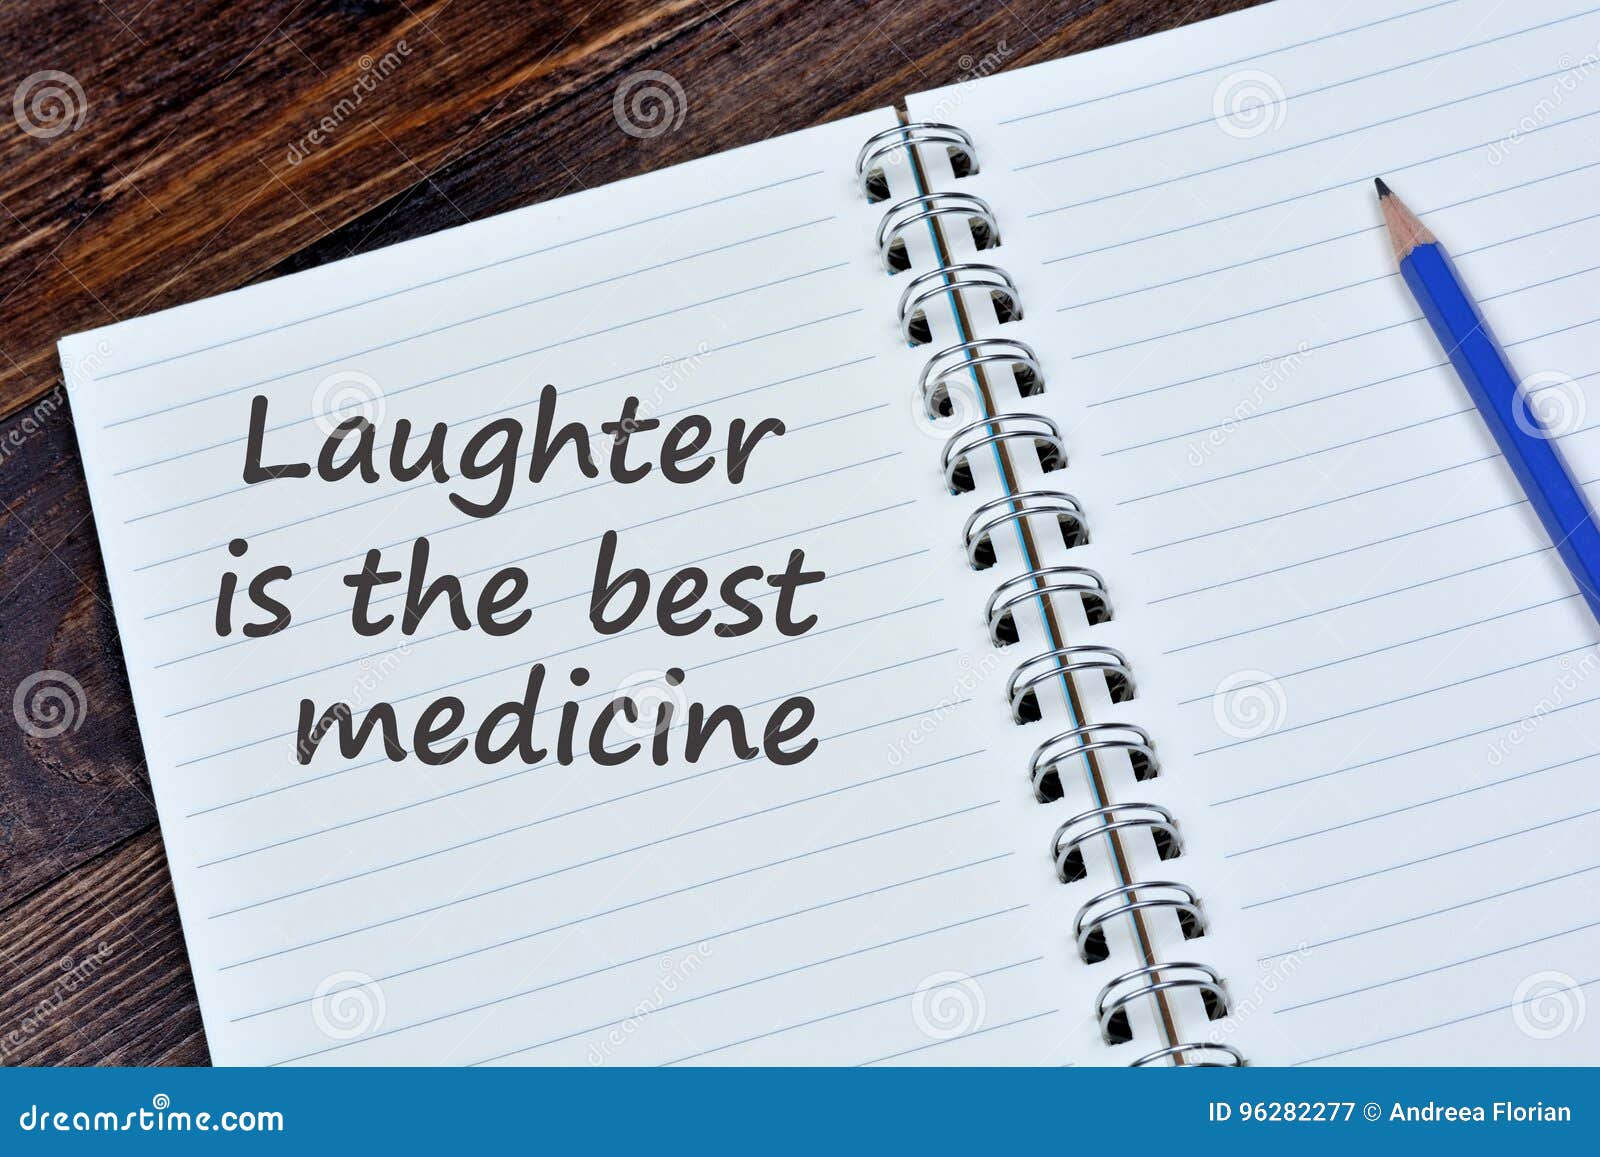 laughter is the best medicine words on notebook